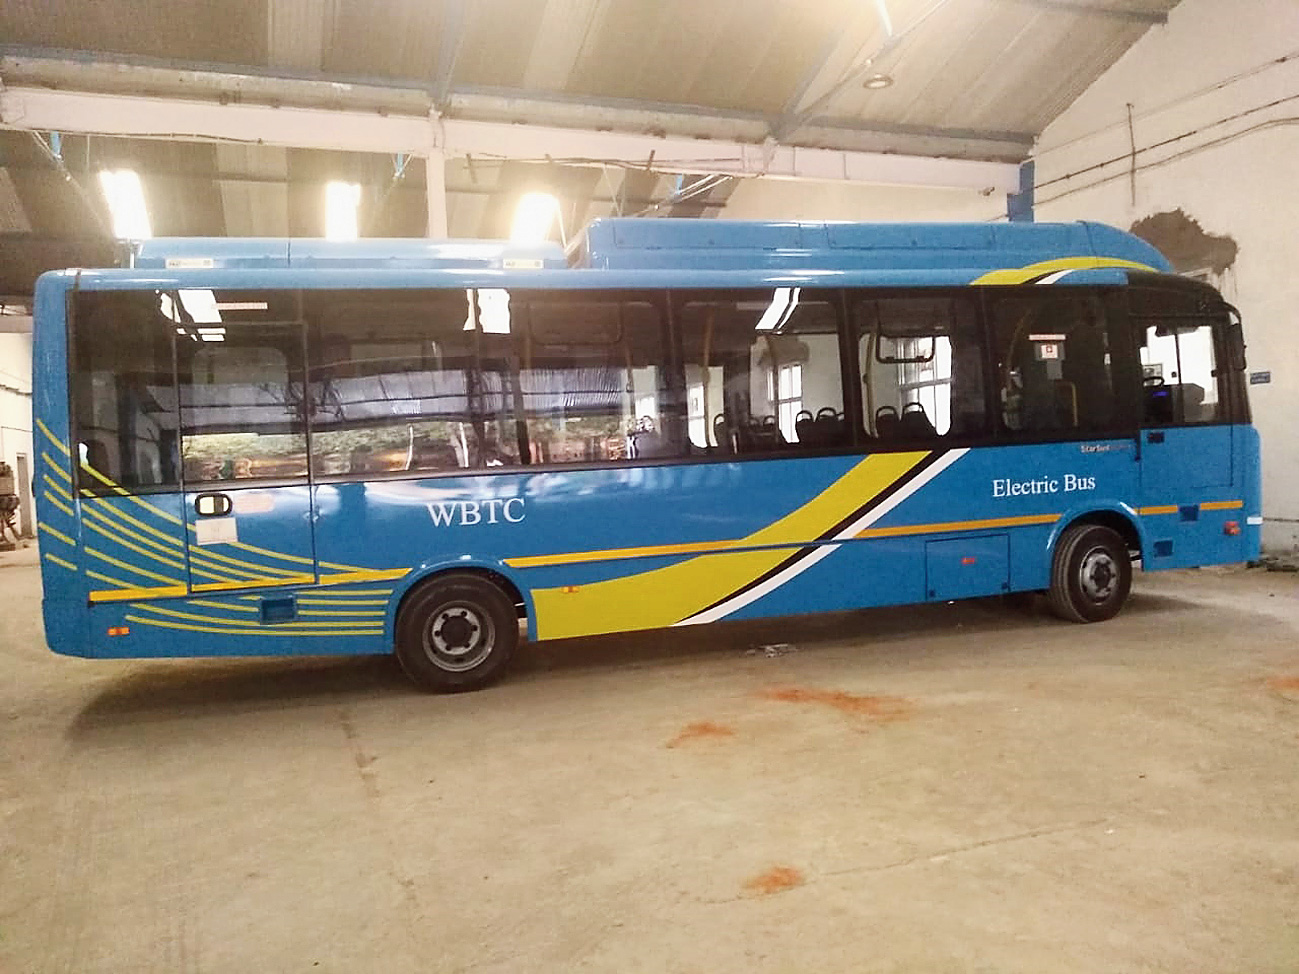 One of the electric buses at the shed at Nonapukur tram depot.